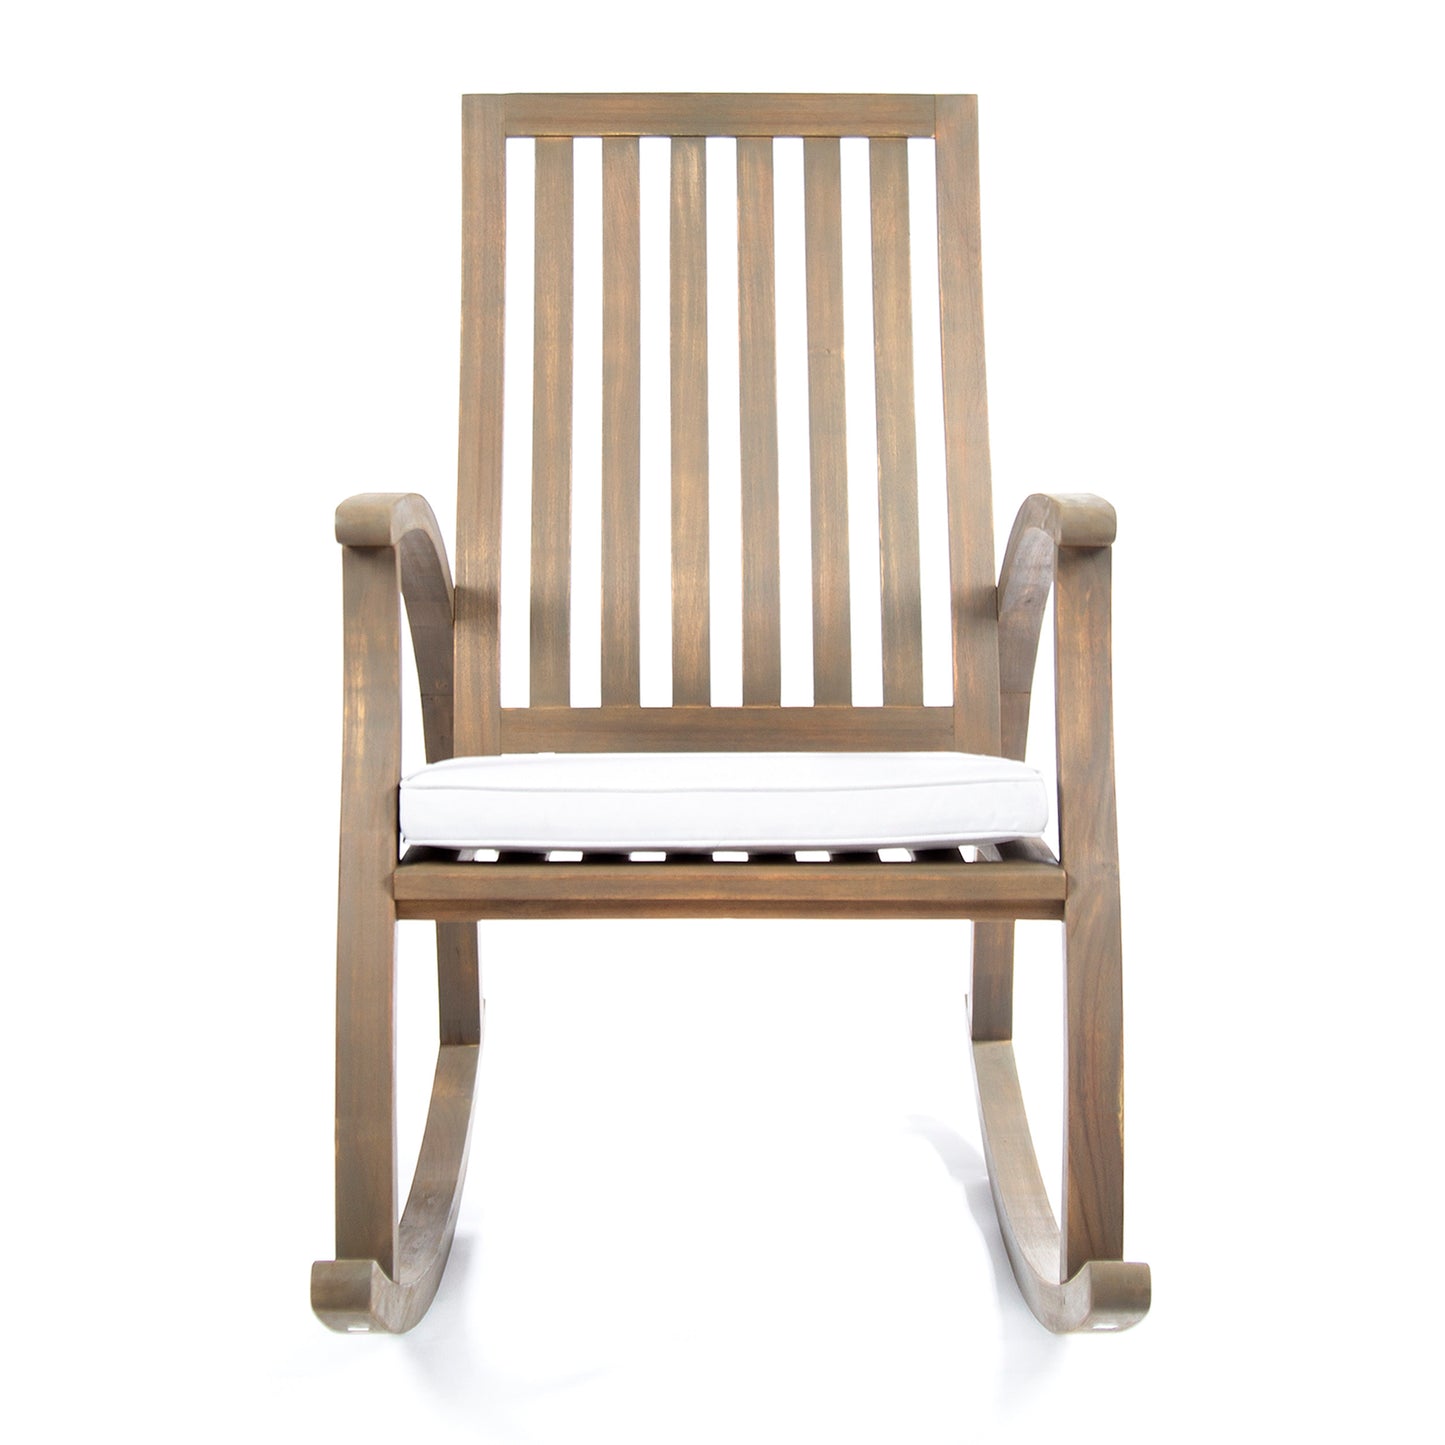 Cattan Outdoor Acacia Wood Rocking Chair with Water Resistant Cushion